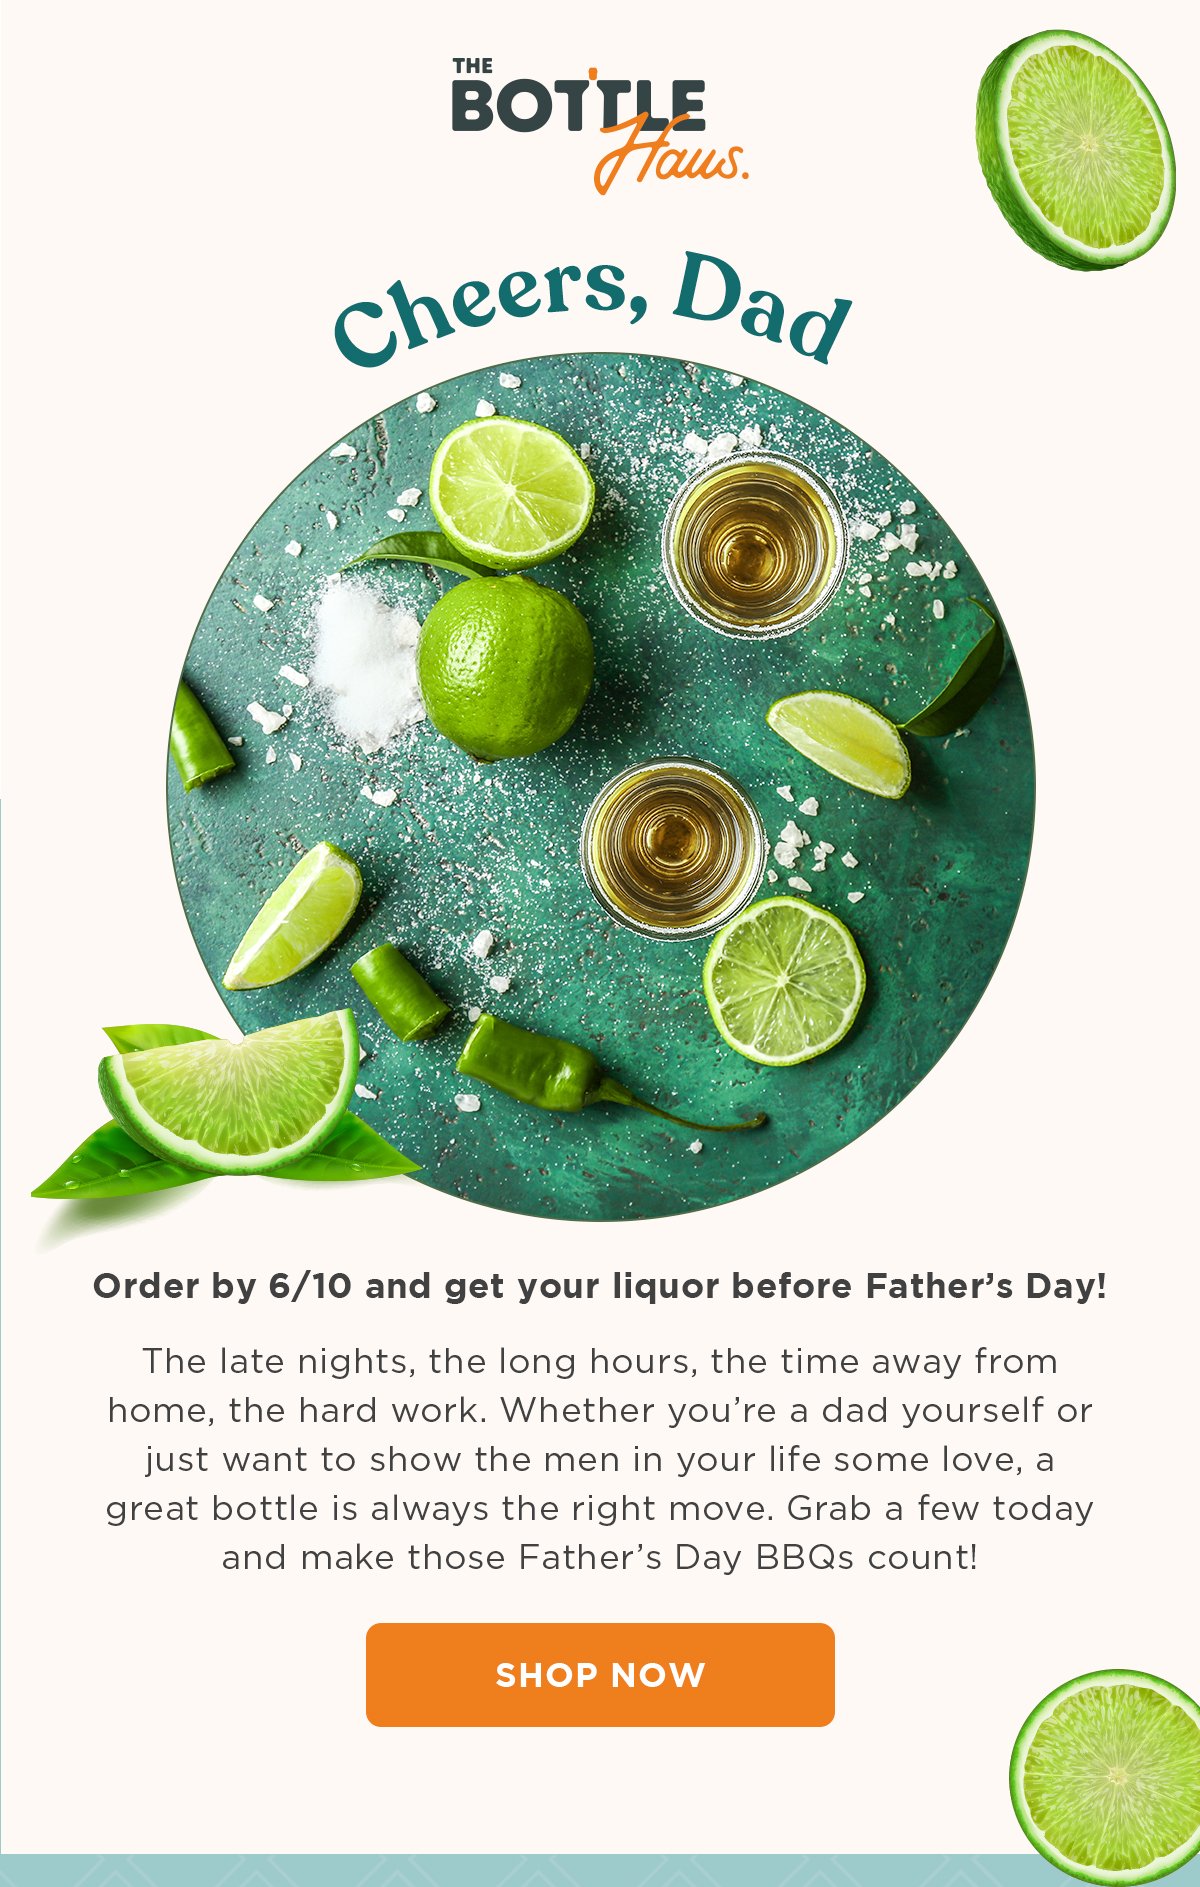 Order by 6/10 and get your liquor before Father's Day!